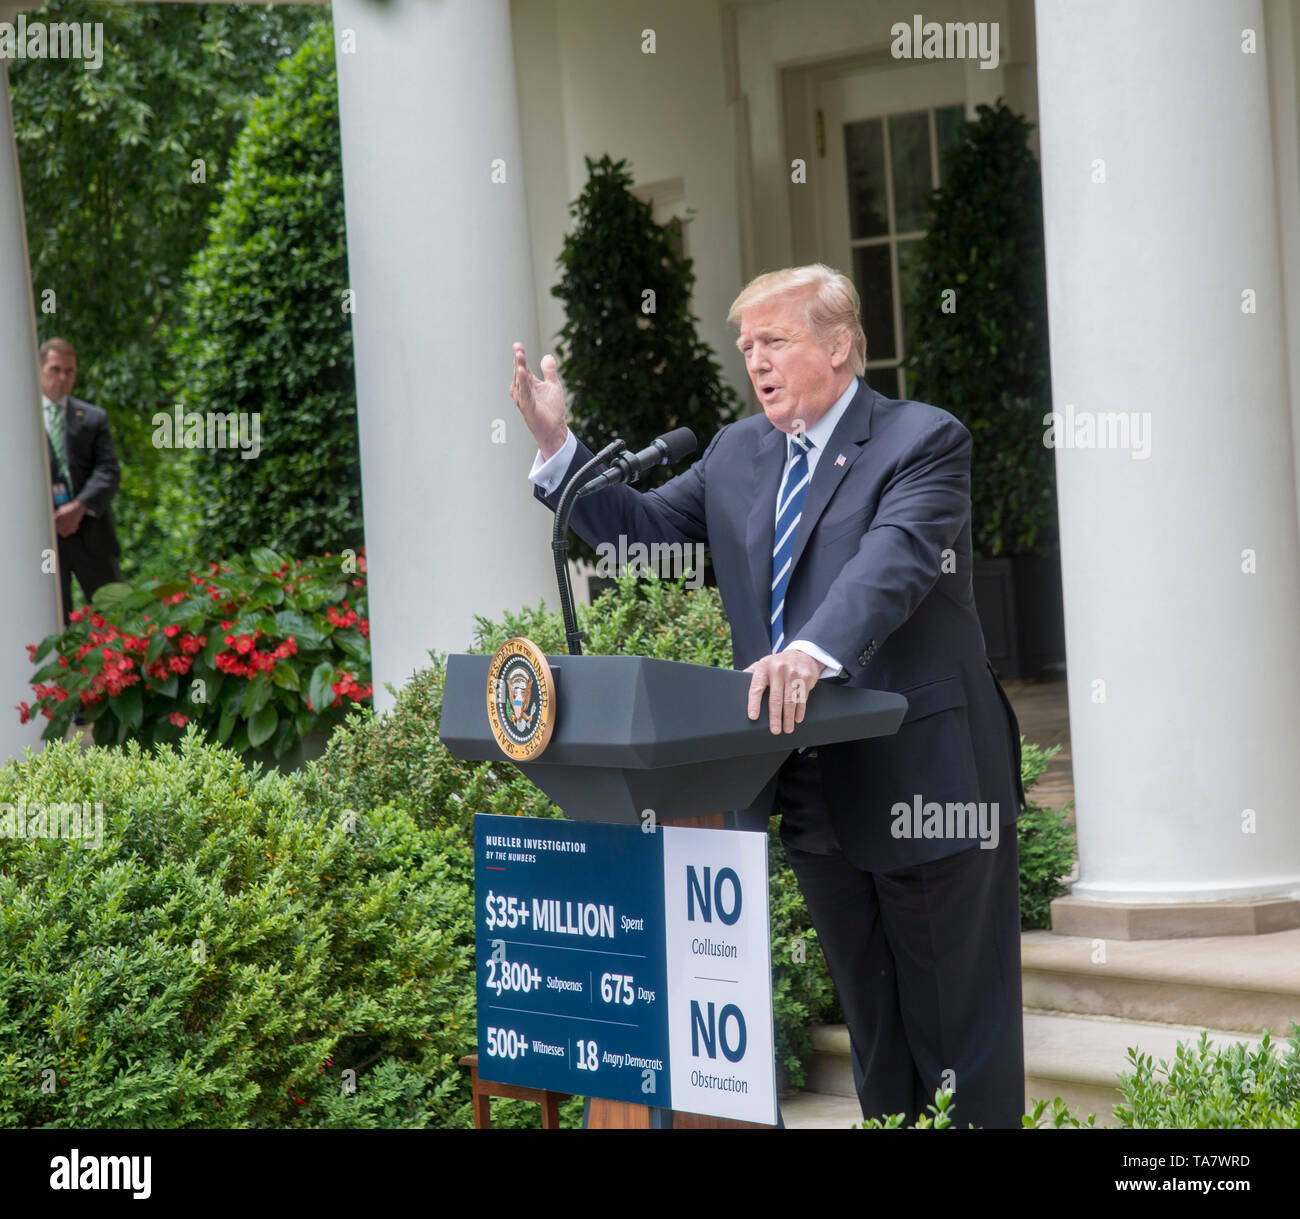 Washington DC , May 22, 2019, USA: President Donald J Trump holds an impromptu press conference in the White House Rose garden to condemn the on-going Stock Photo